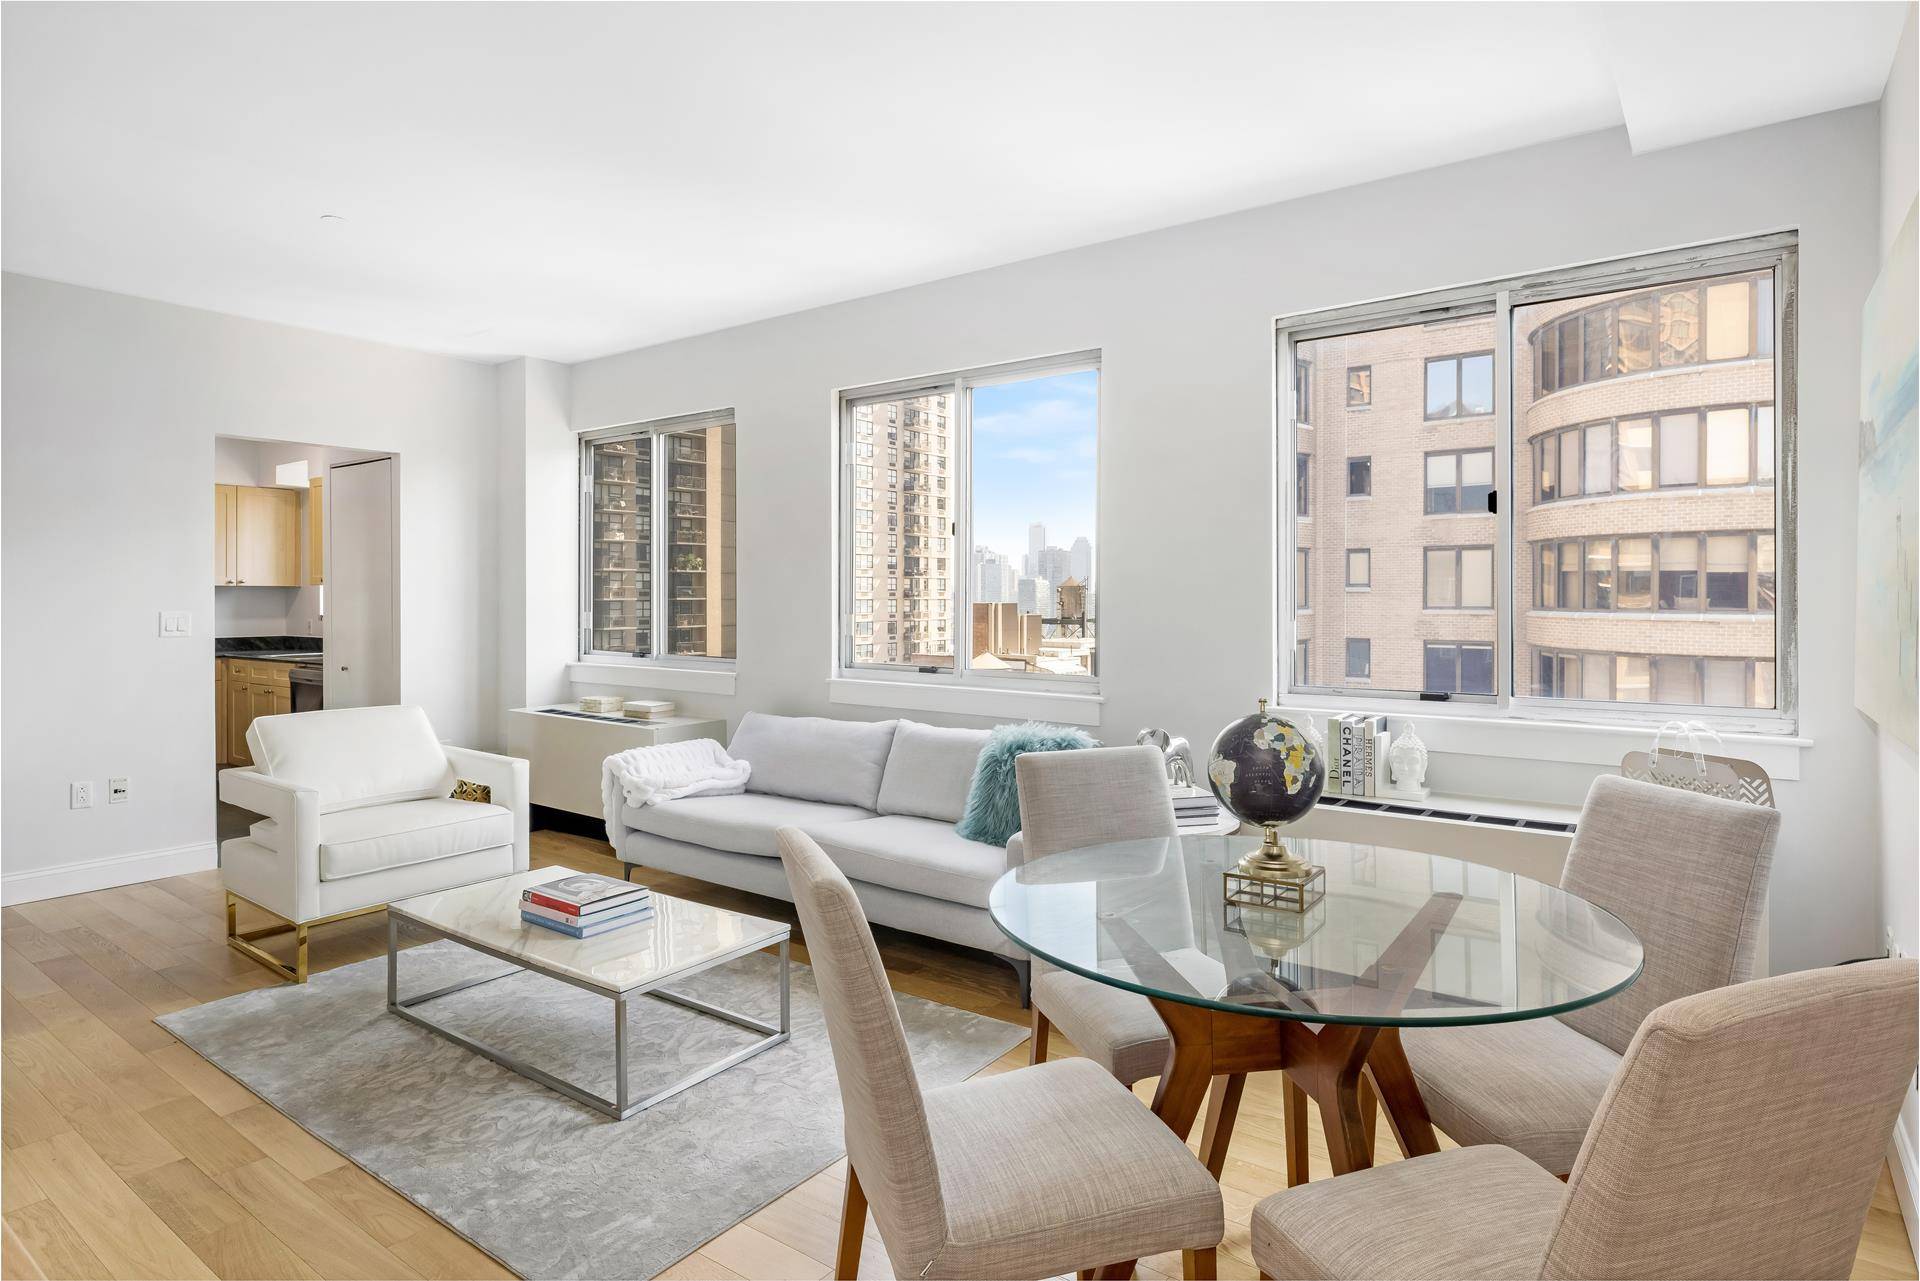 This high floor one bed, one and a bath duplex Condo offers stunnning city views from the East facing windows.